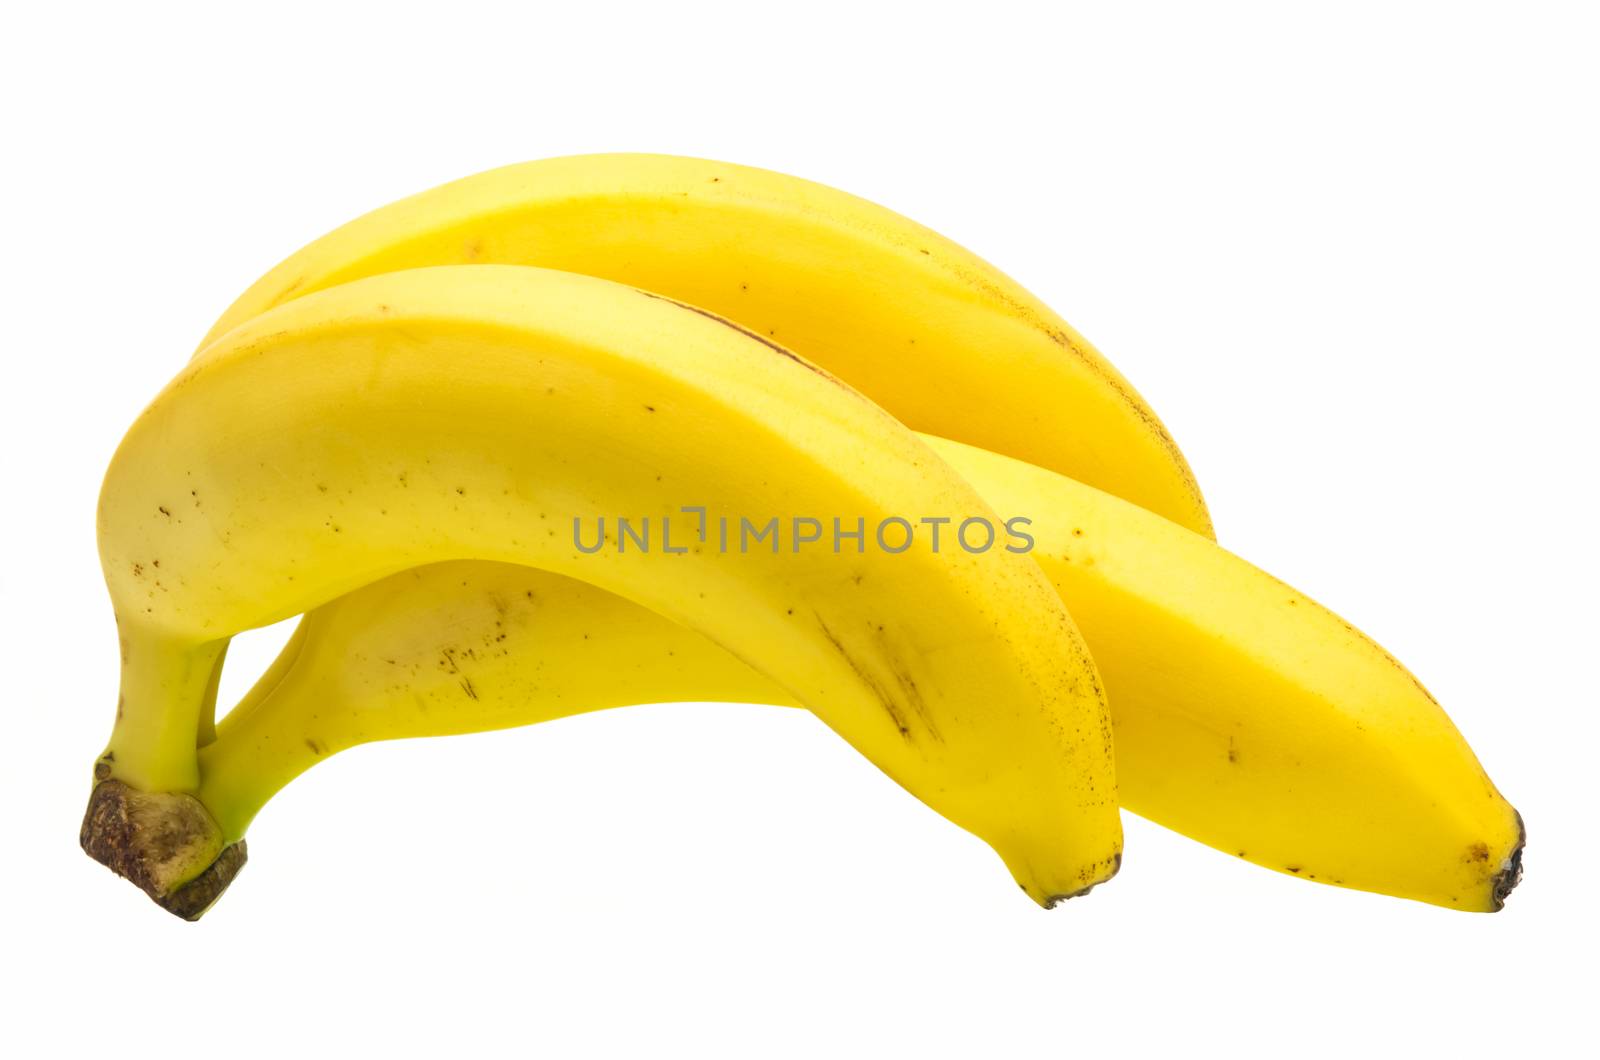 Yellow bananas on white by savcoco